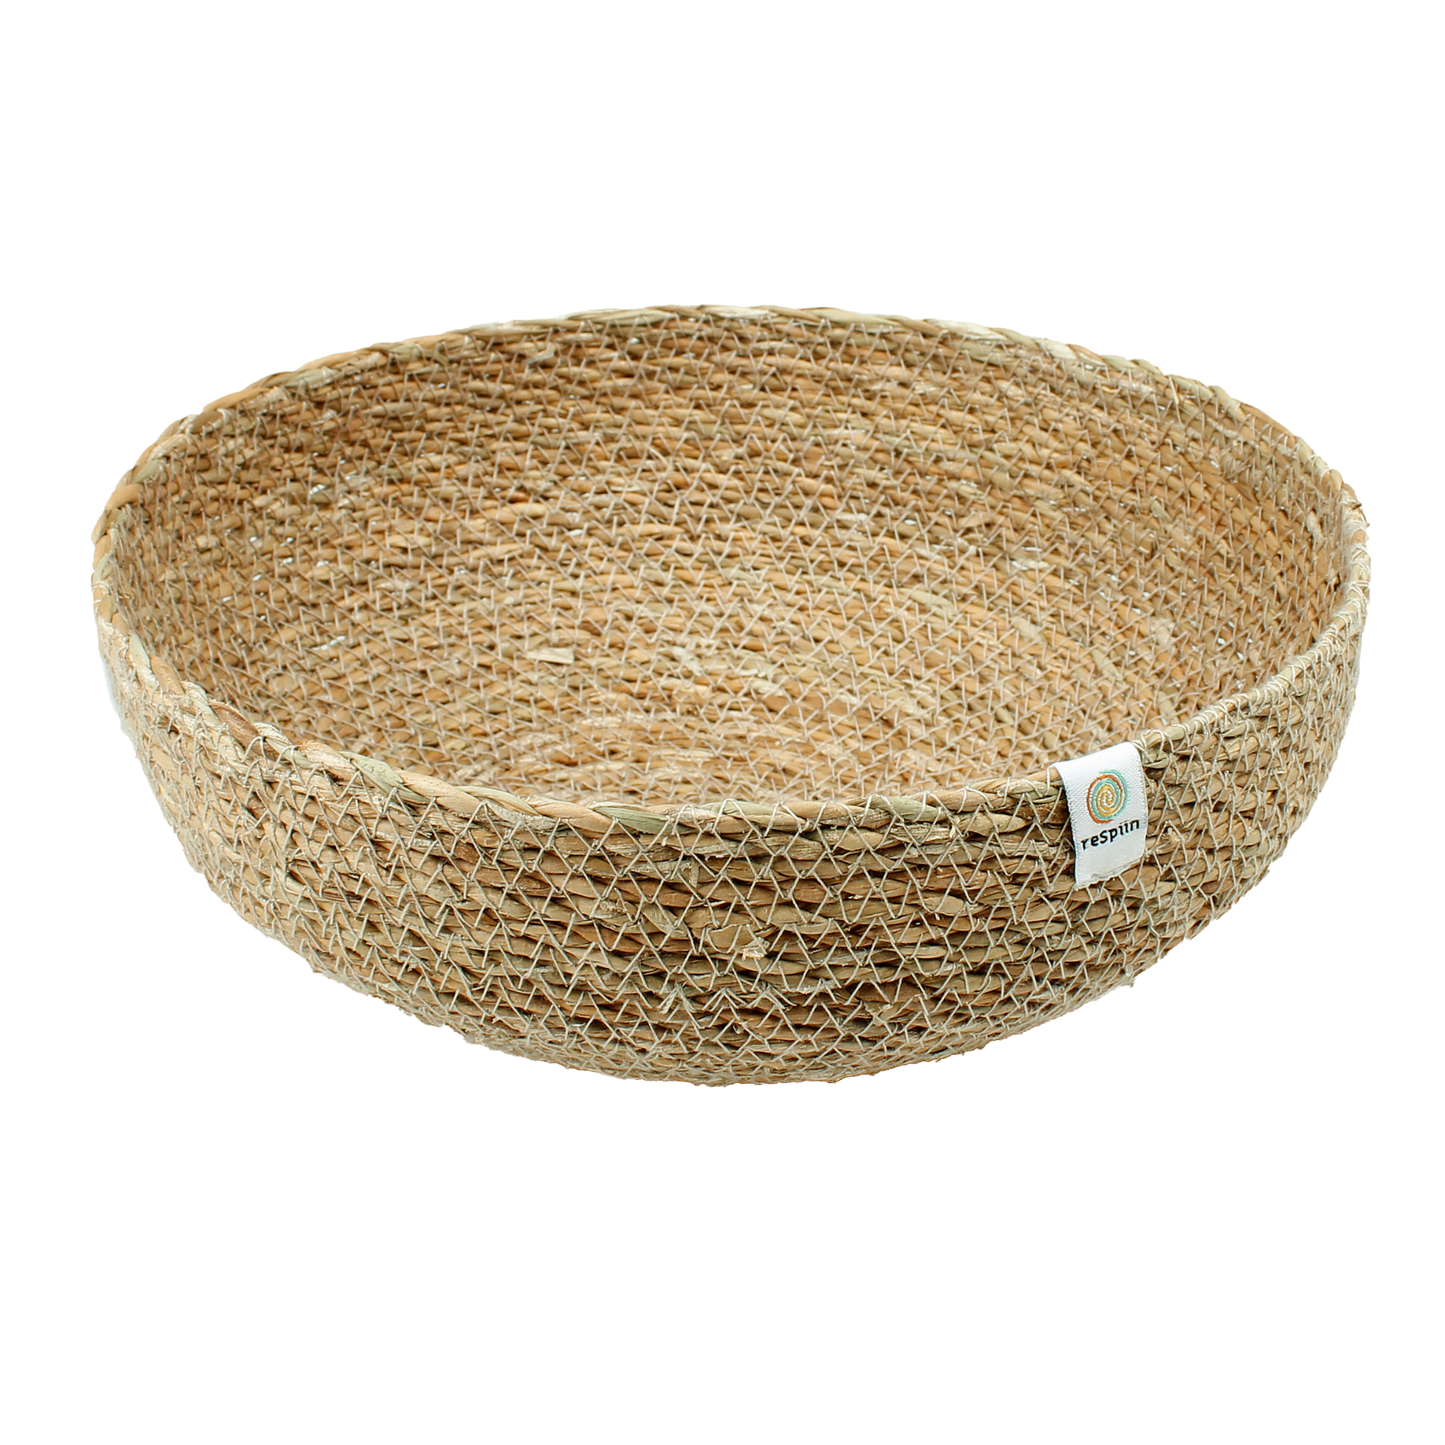 LARGE Woven Seagrass Bowl - NATURAL